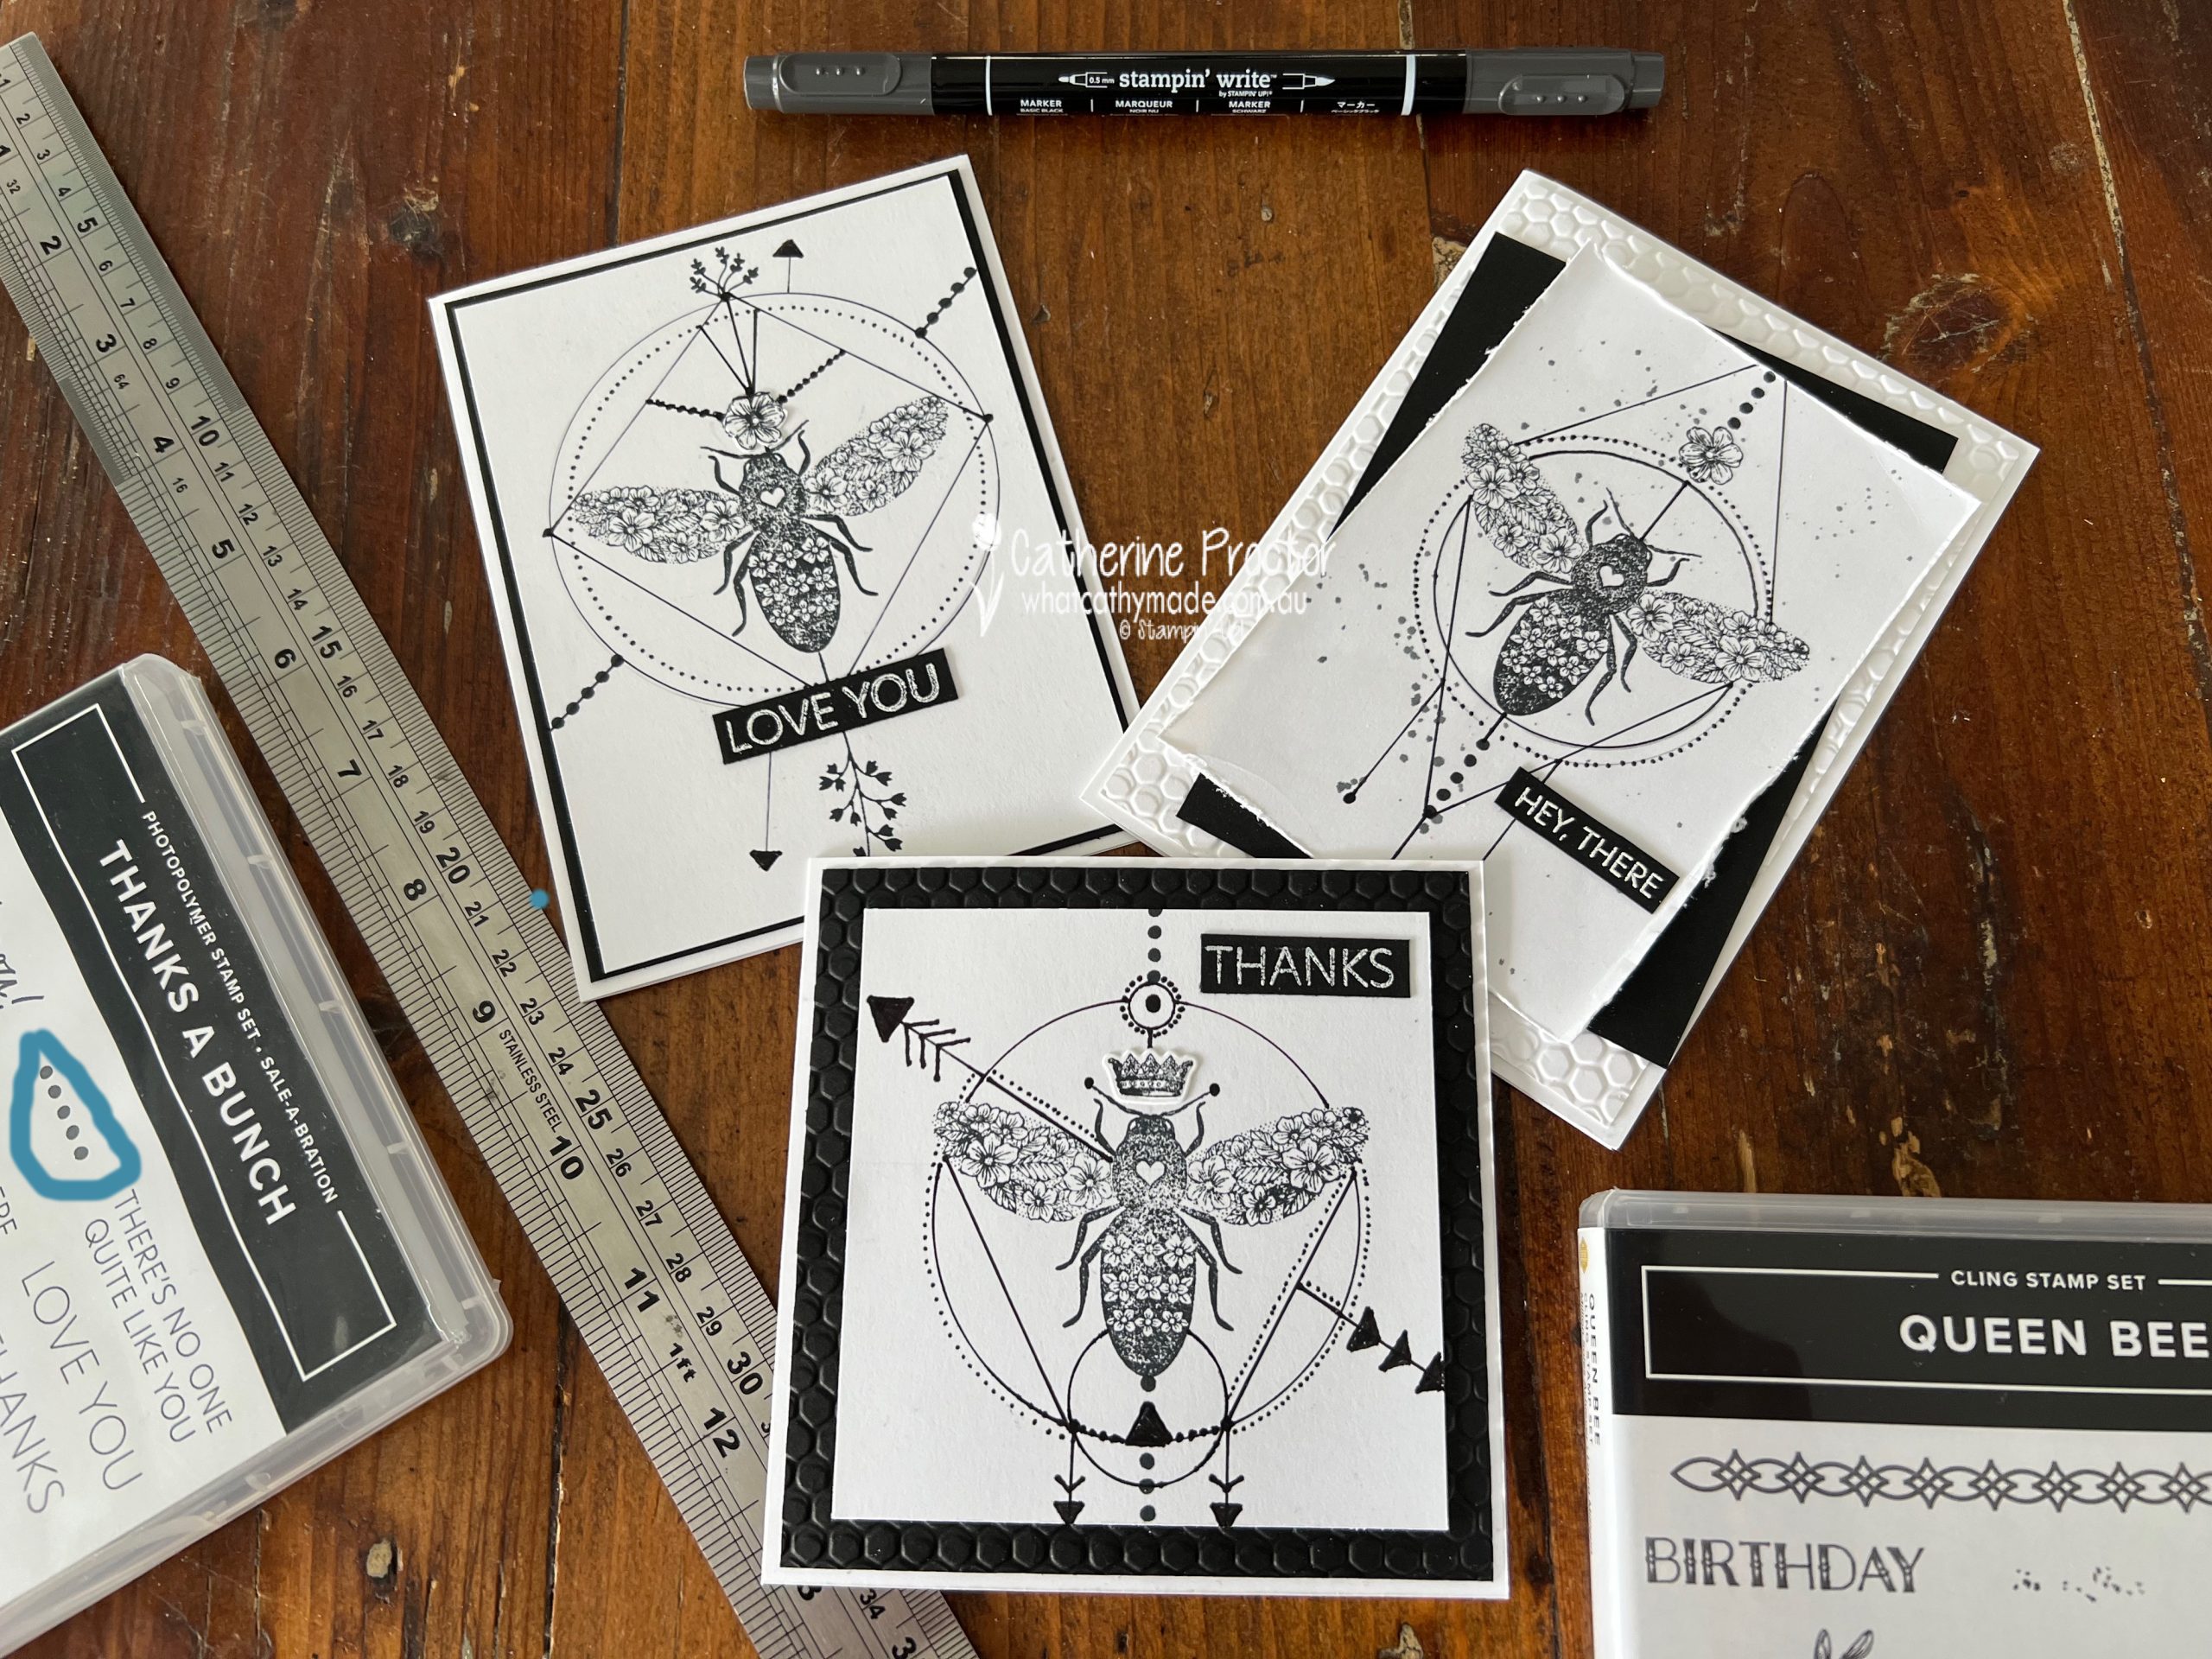 Queen Bee Stamp Set by Stampin' Up!